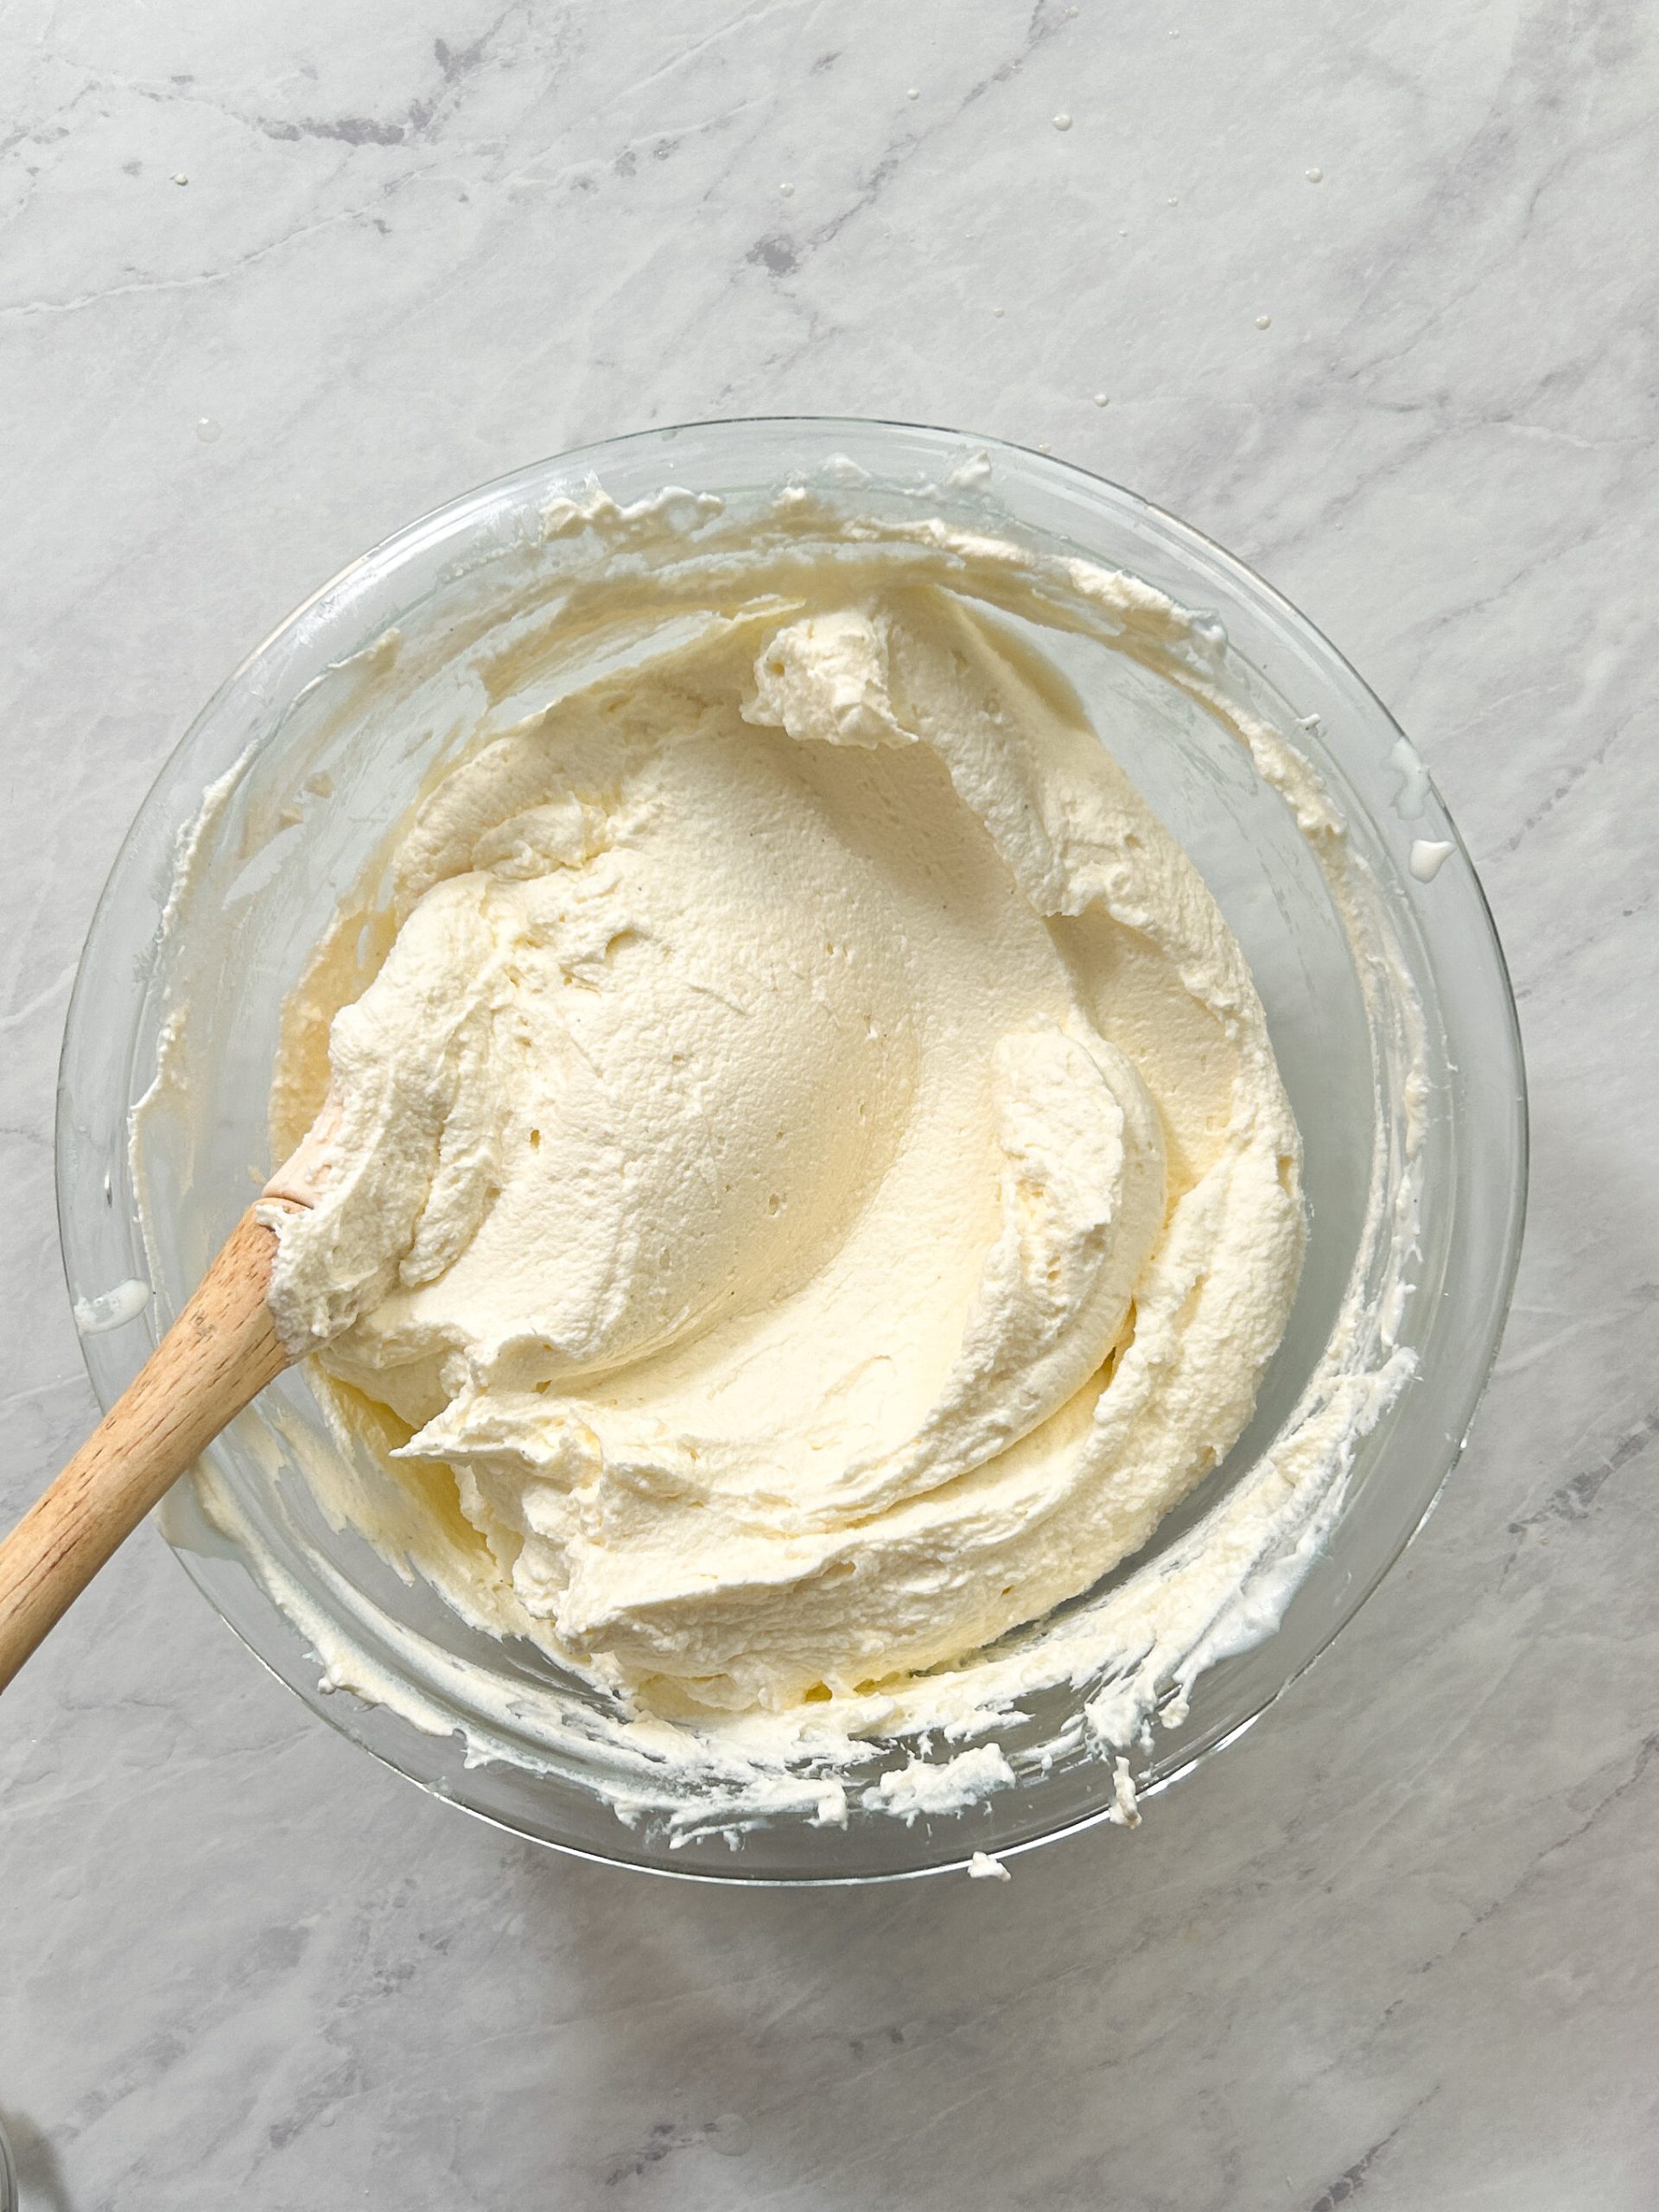 thick and fluffy mascarpone cream mixture in a glass bowl with a rubber spatula inside